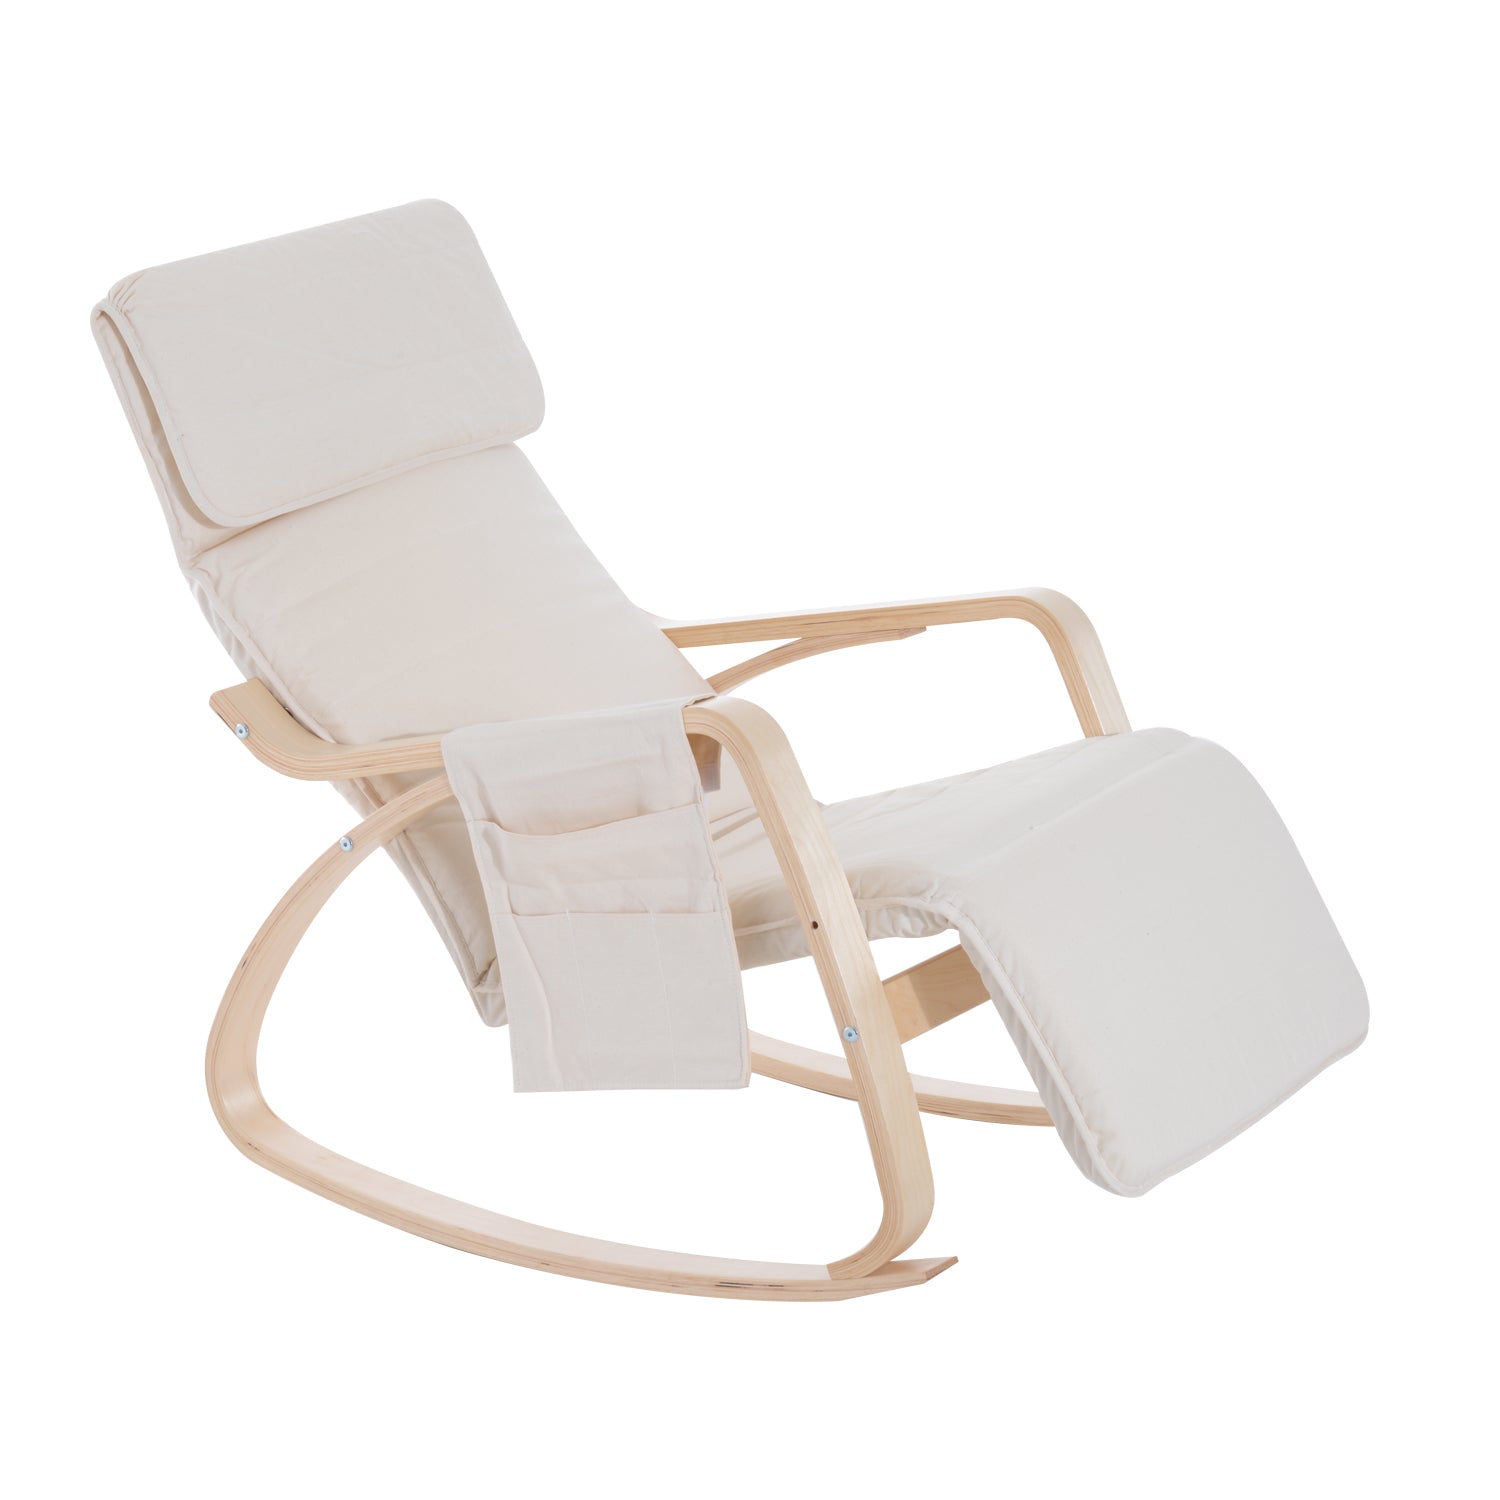 HOMCOM Rocking Chair Recliner Armchair with Adjustable Footrest - Cream White  | TJ Hughes